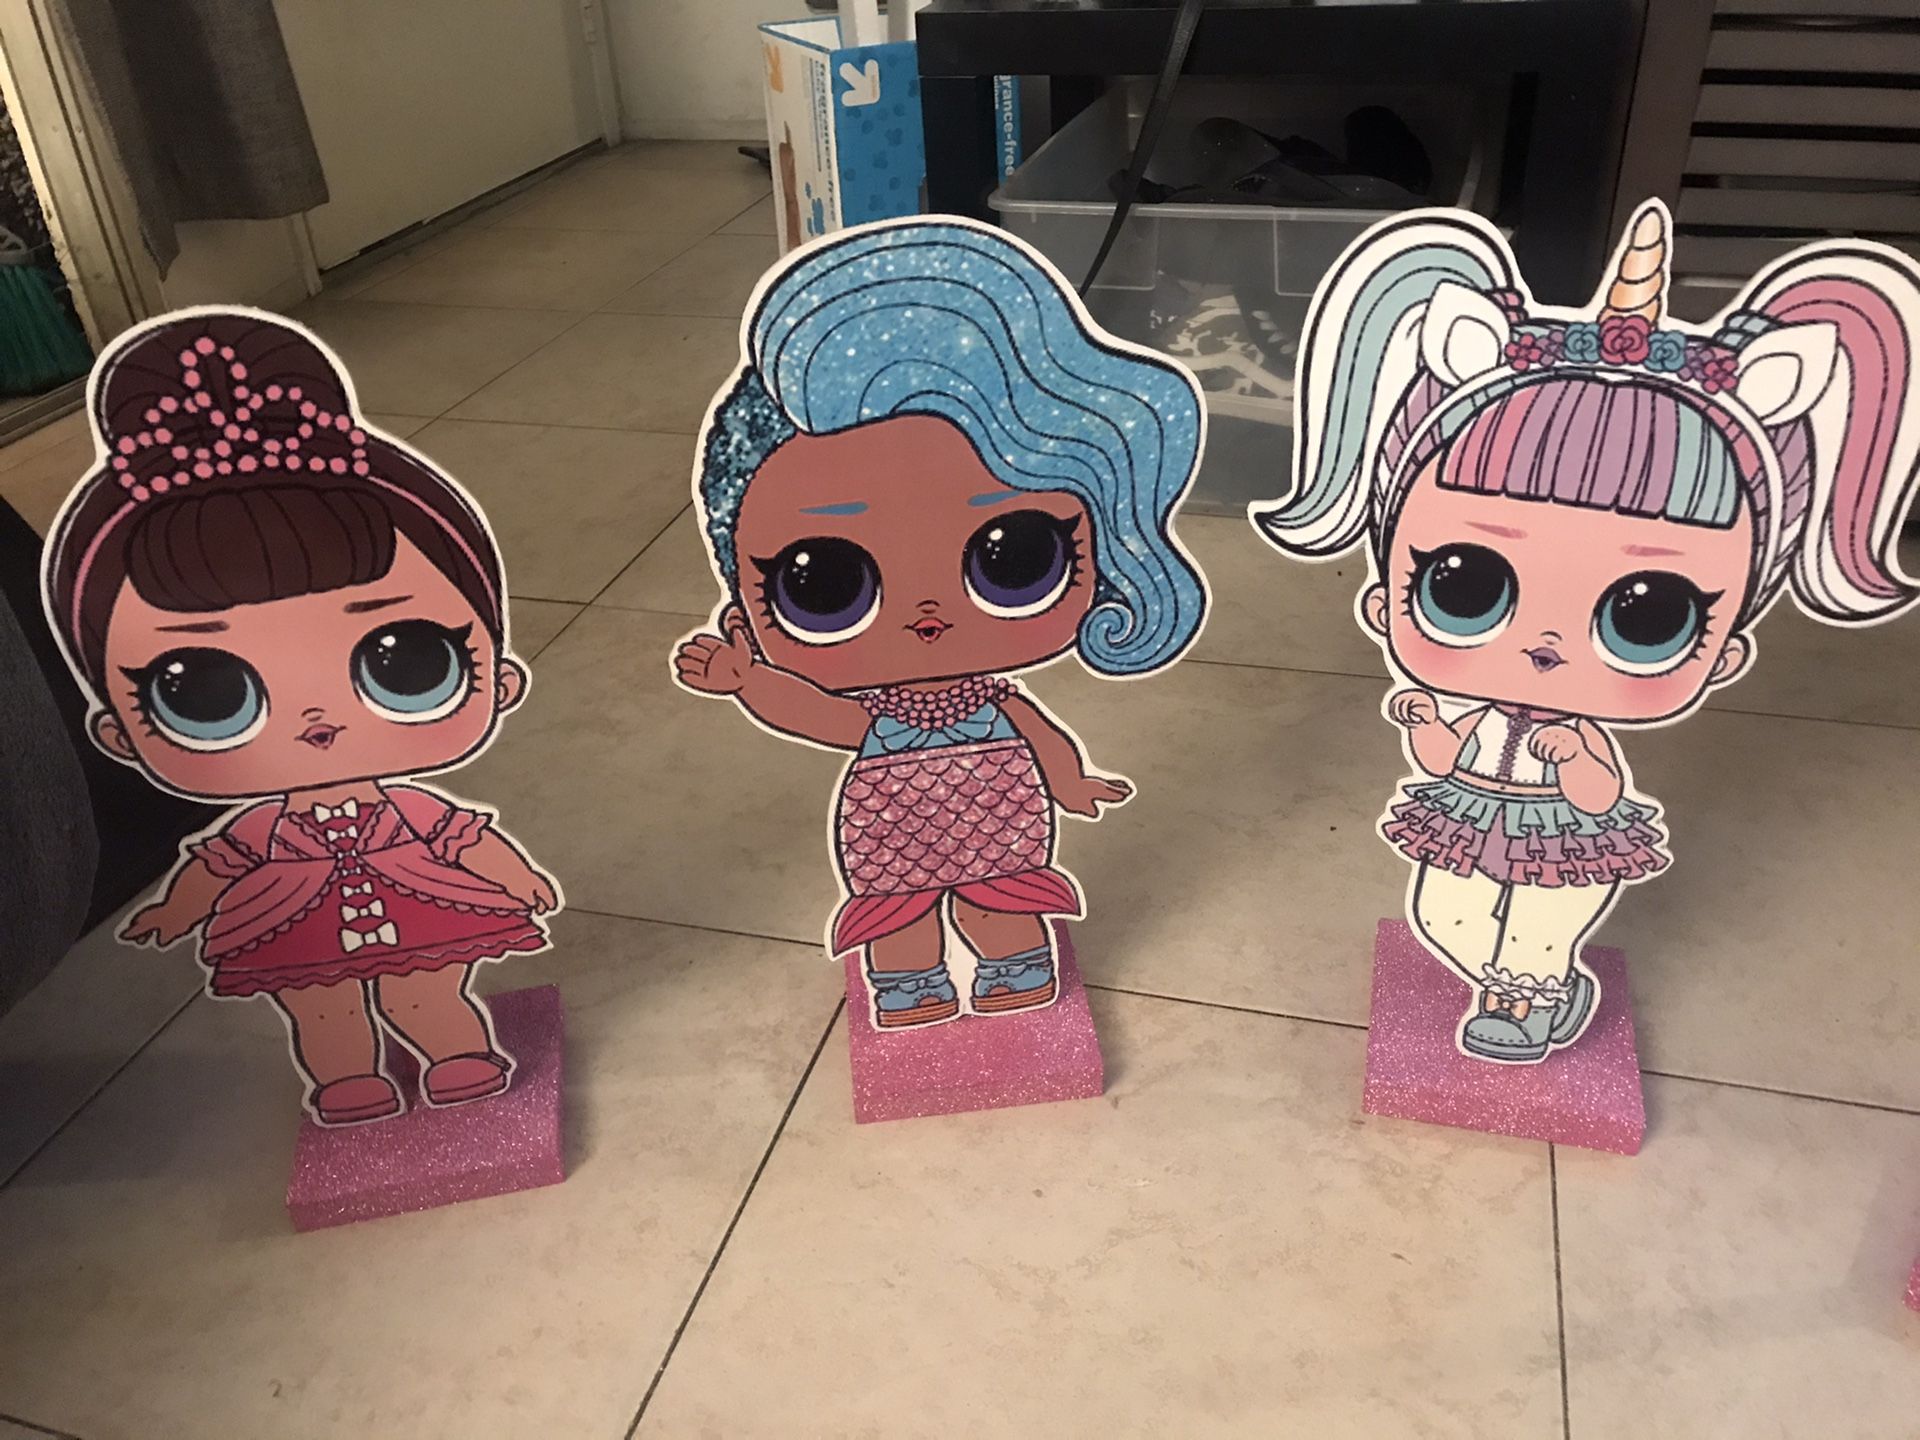 LOL SURPRISE 17” WOODEN STANDS- $10 Each